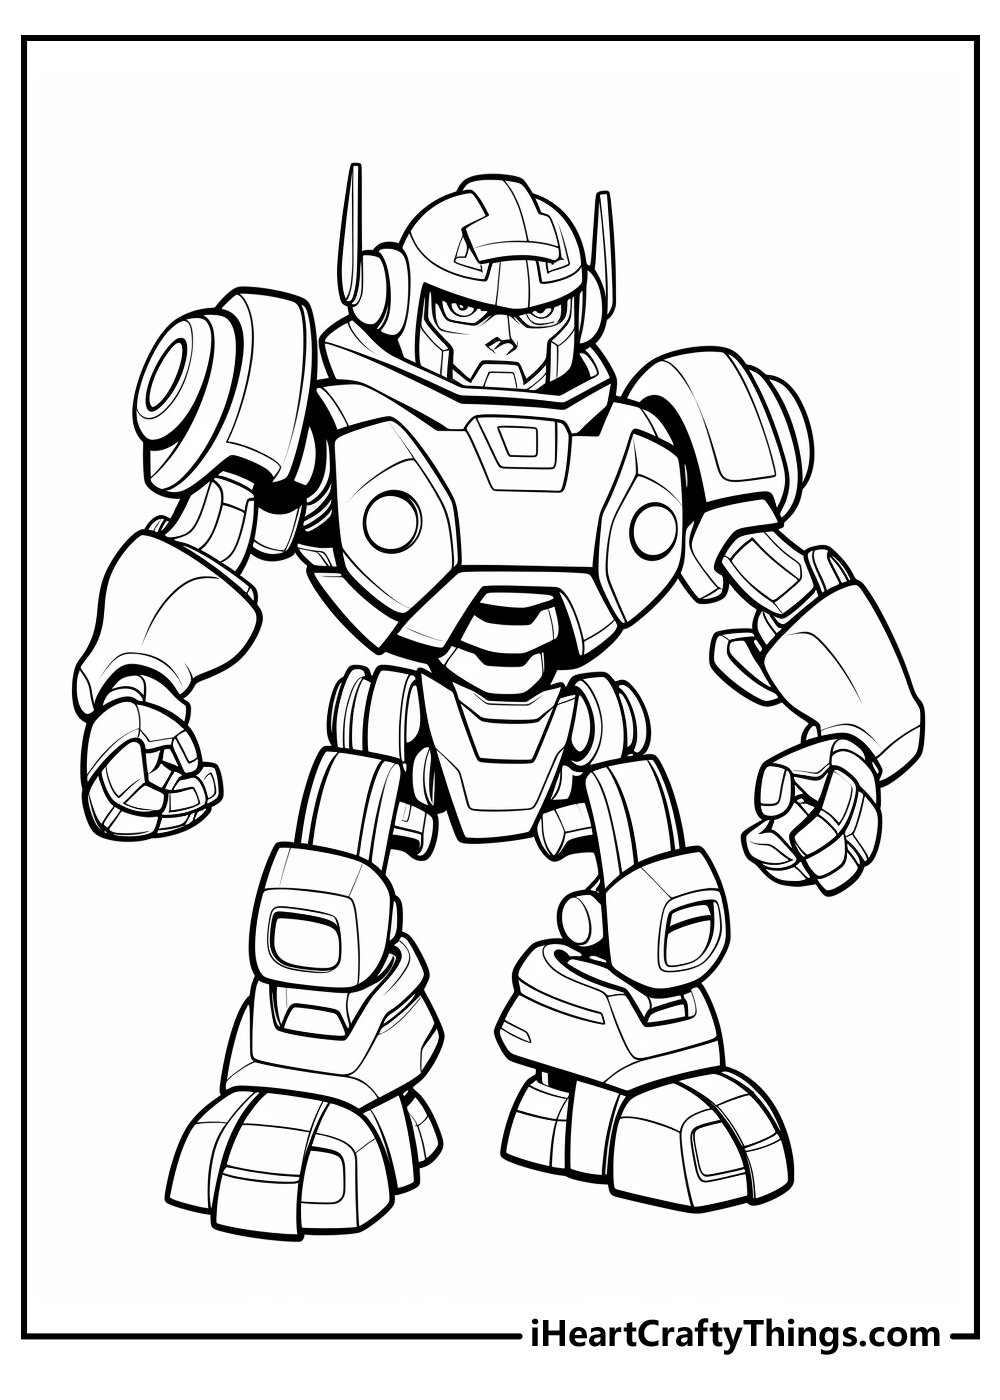 Bumblebee Coloring Pages for kids